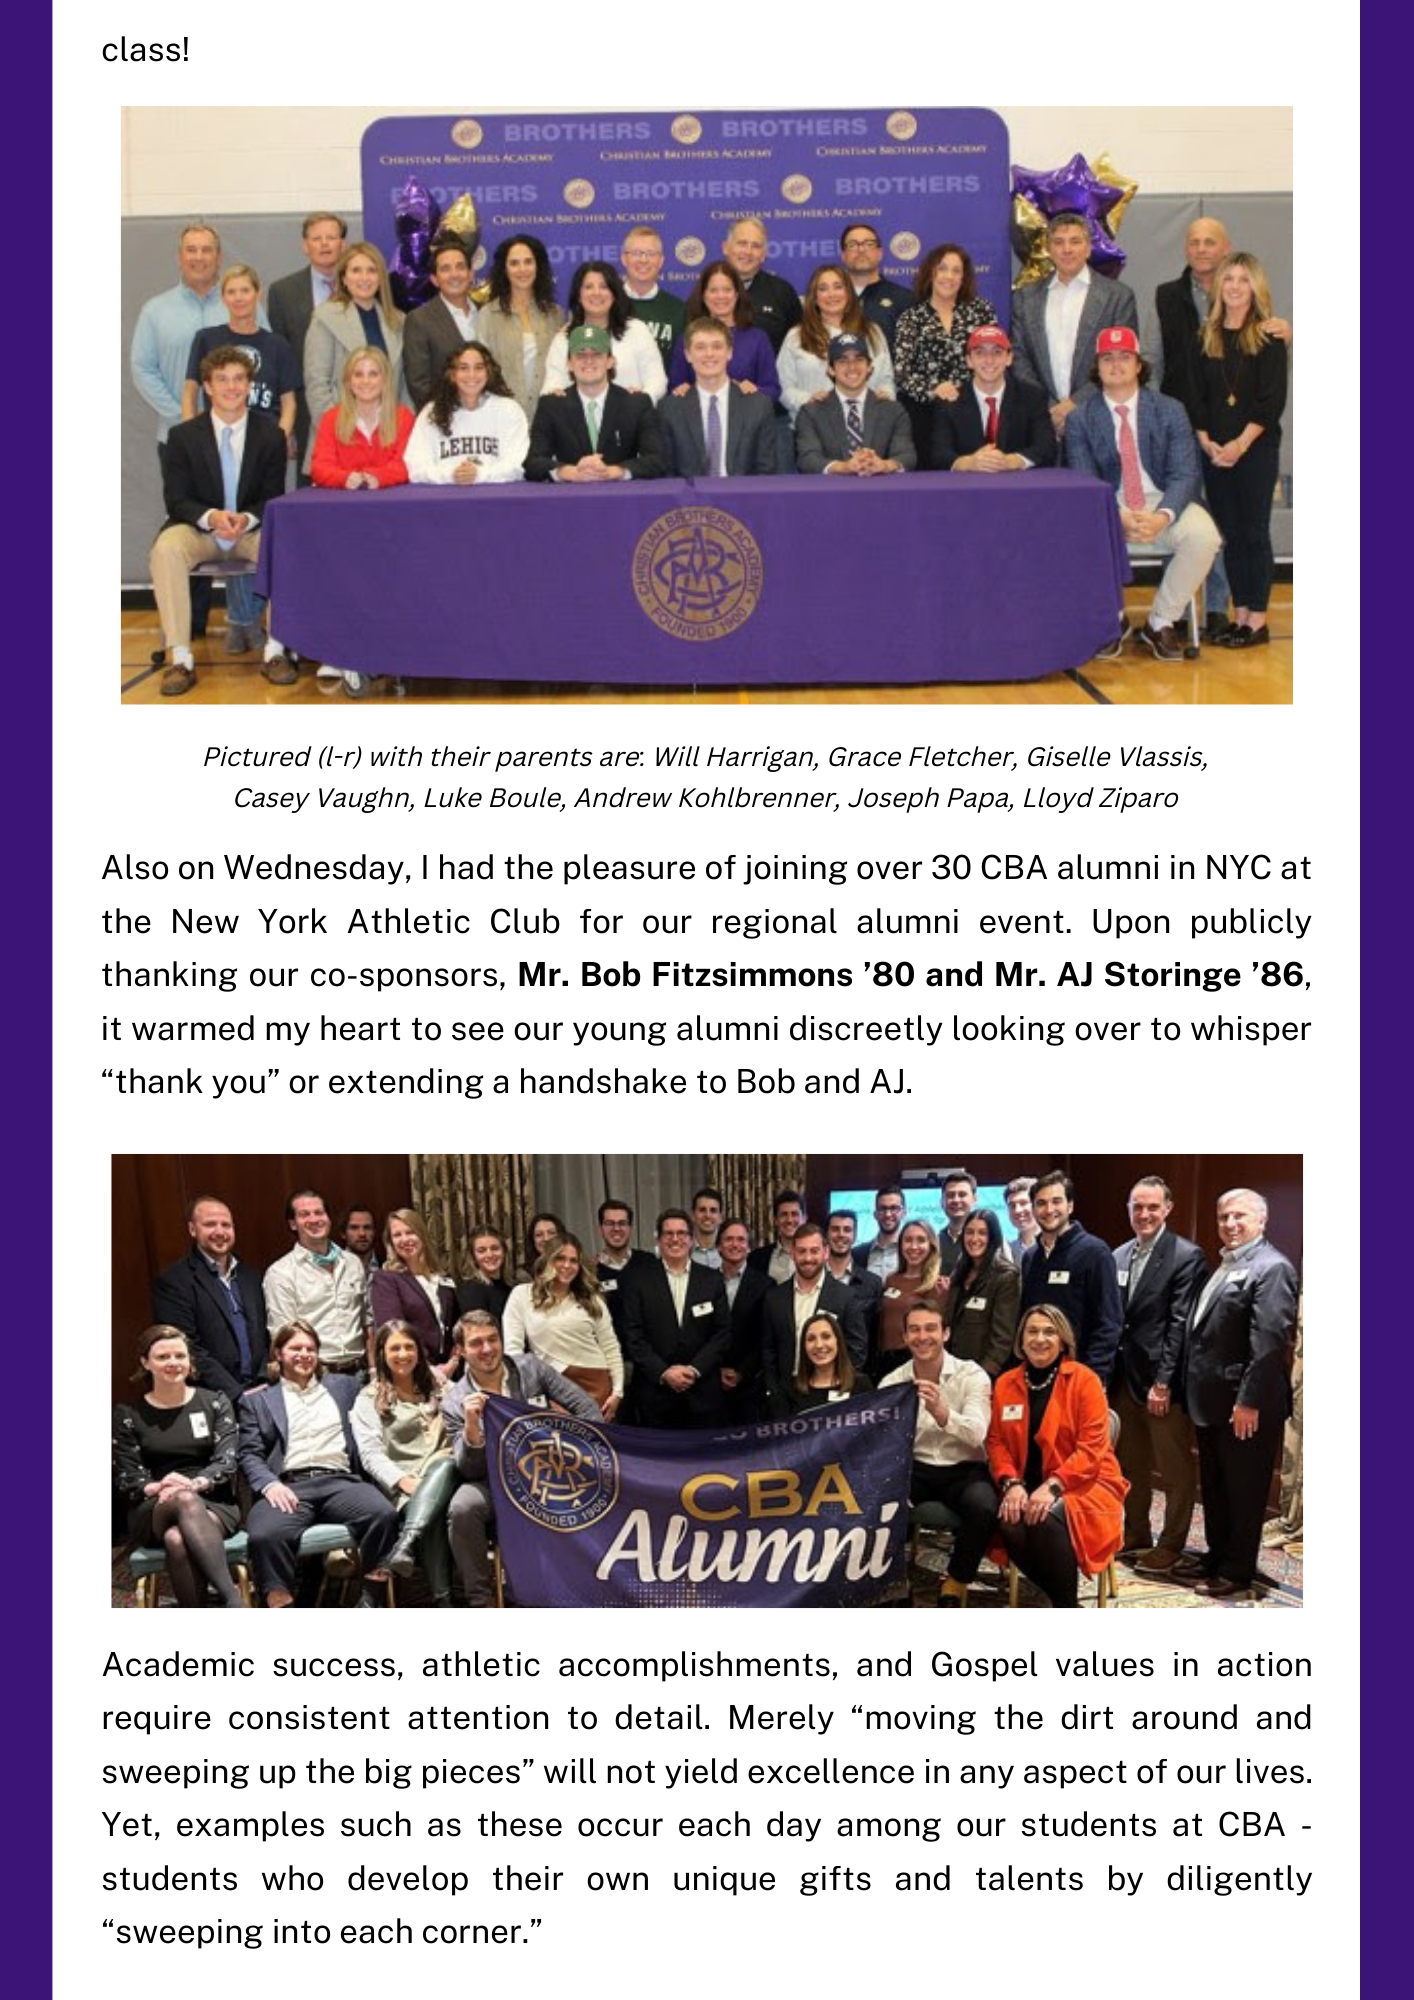 Christian Brothers Academy in Syracuse, NY Private School recognizes eight student athletes that made commitments to play Division 1 athletics and CBA Alumni meet in NYC for a regional event at New York Athletic Club.